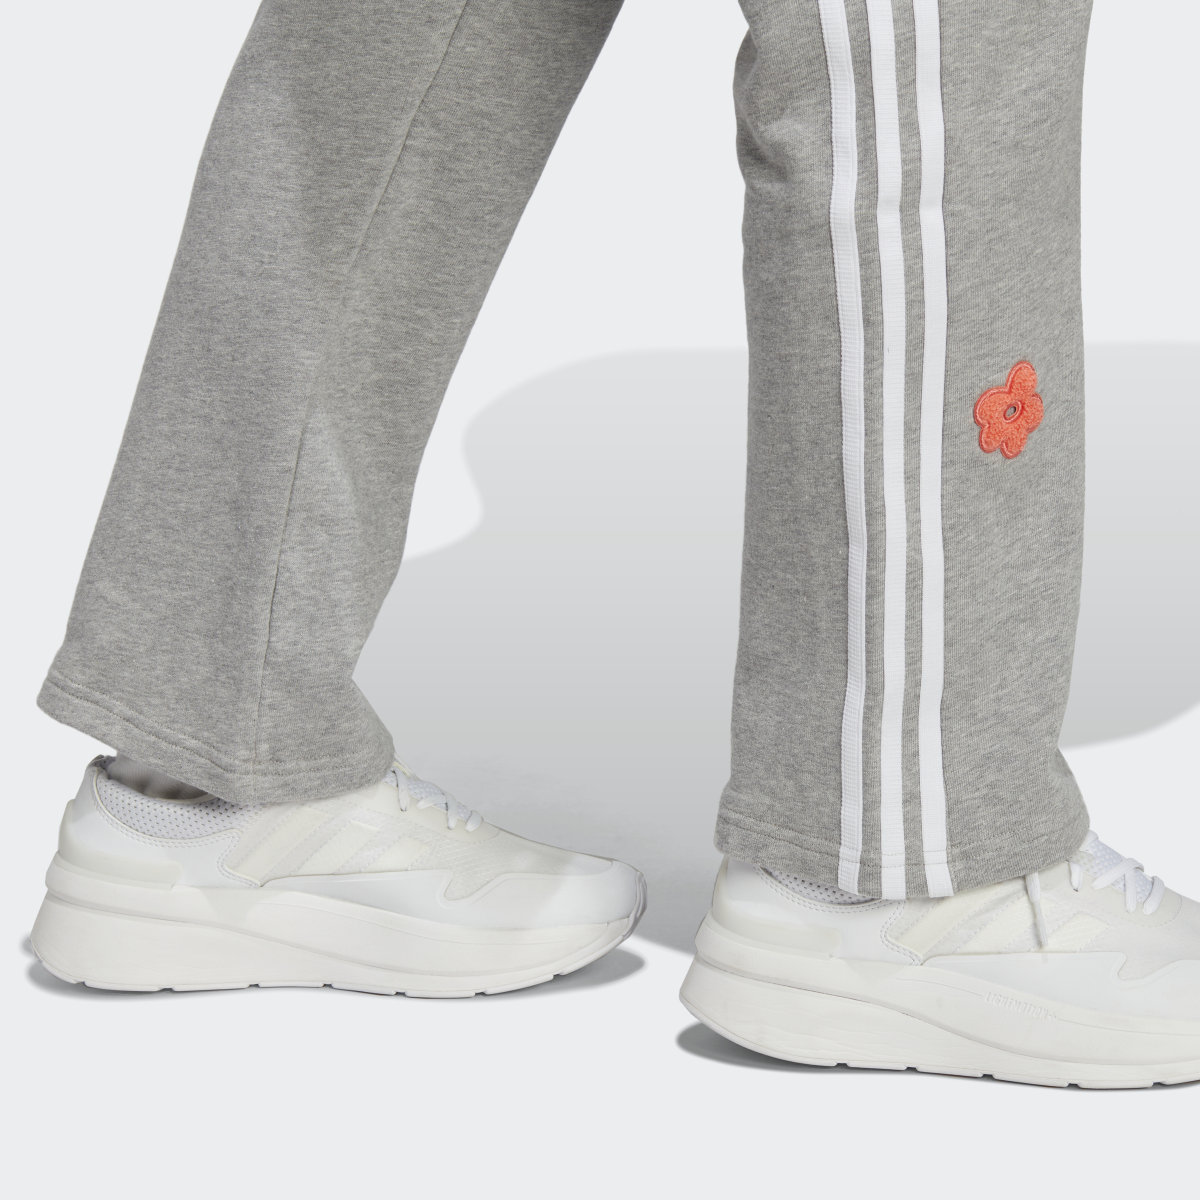 Adidas 3-Stripes High Rise Joggers with Chenille Flower Patches. 7